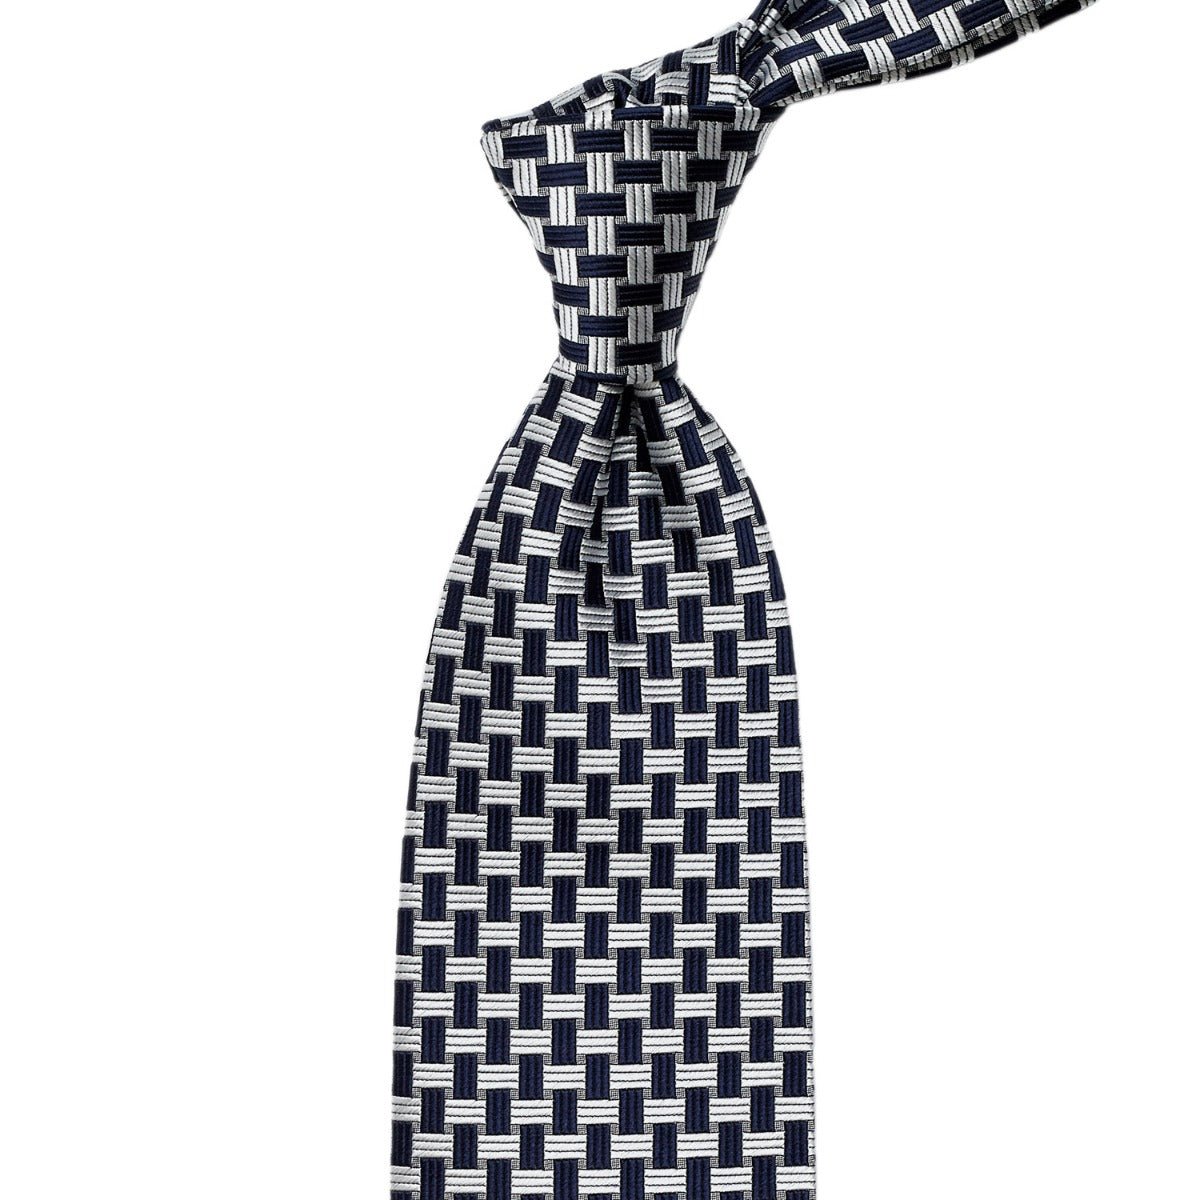 A Sovereign Grade Navy Basket Weave Silk Tie from KirbyAllison.com, handmade with premium linings, featuring a blue and white checkered pattern.